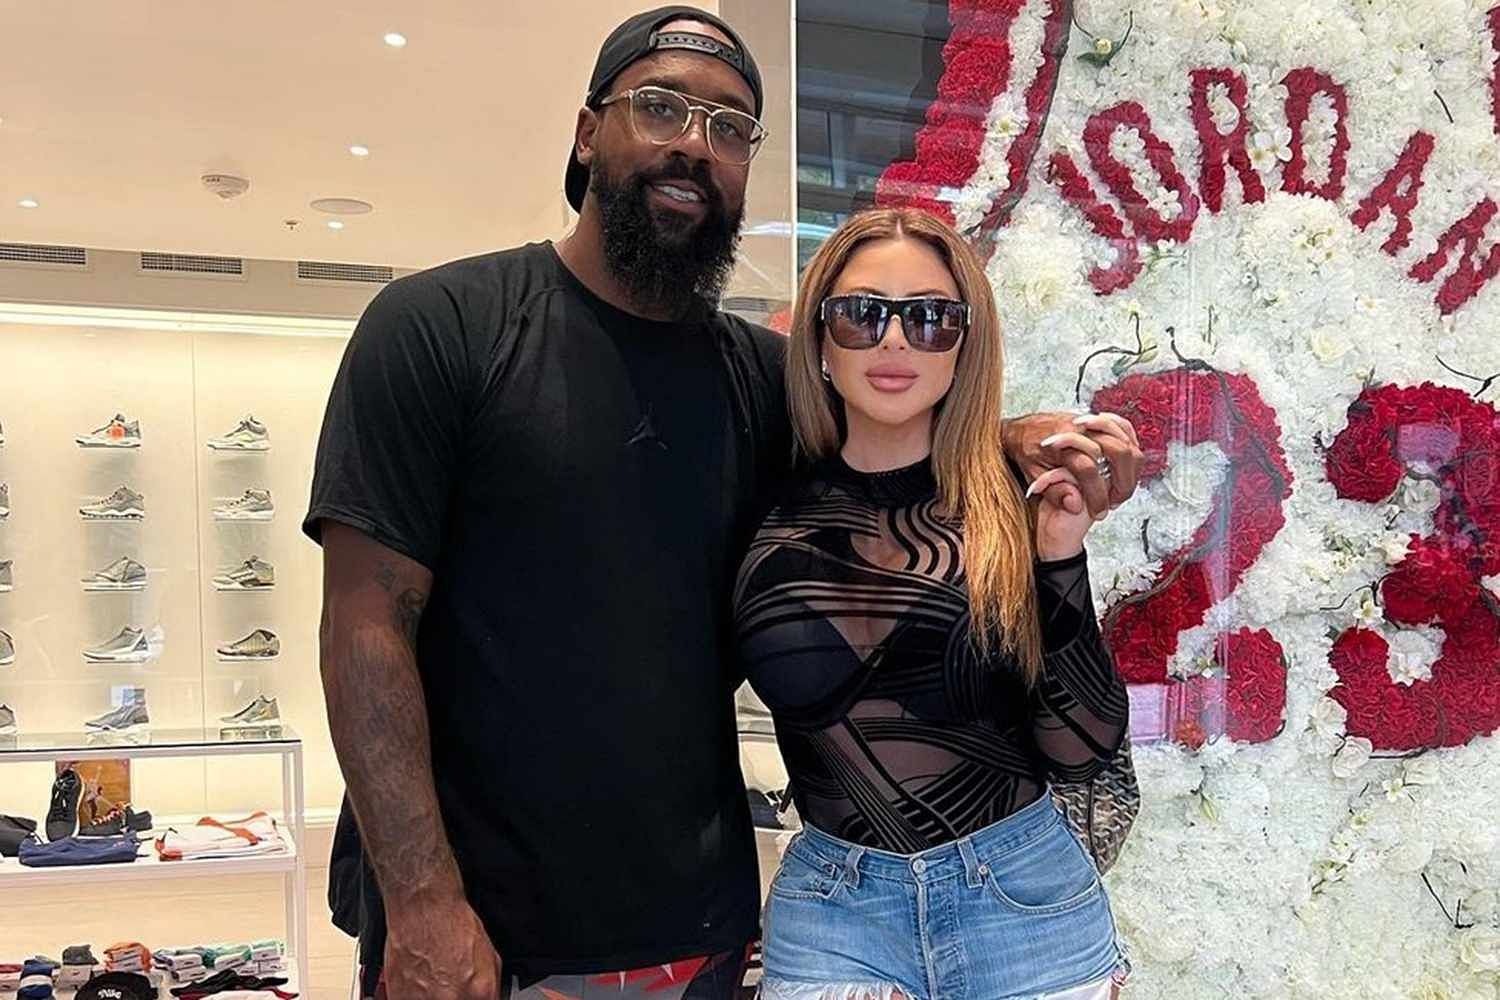 Larsa Pippen and Marcus Jordan spend a day at the golf corse